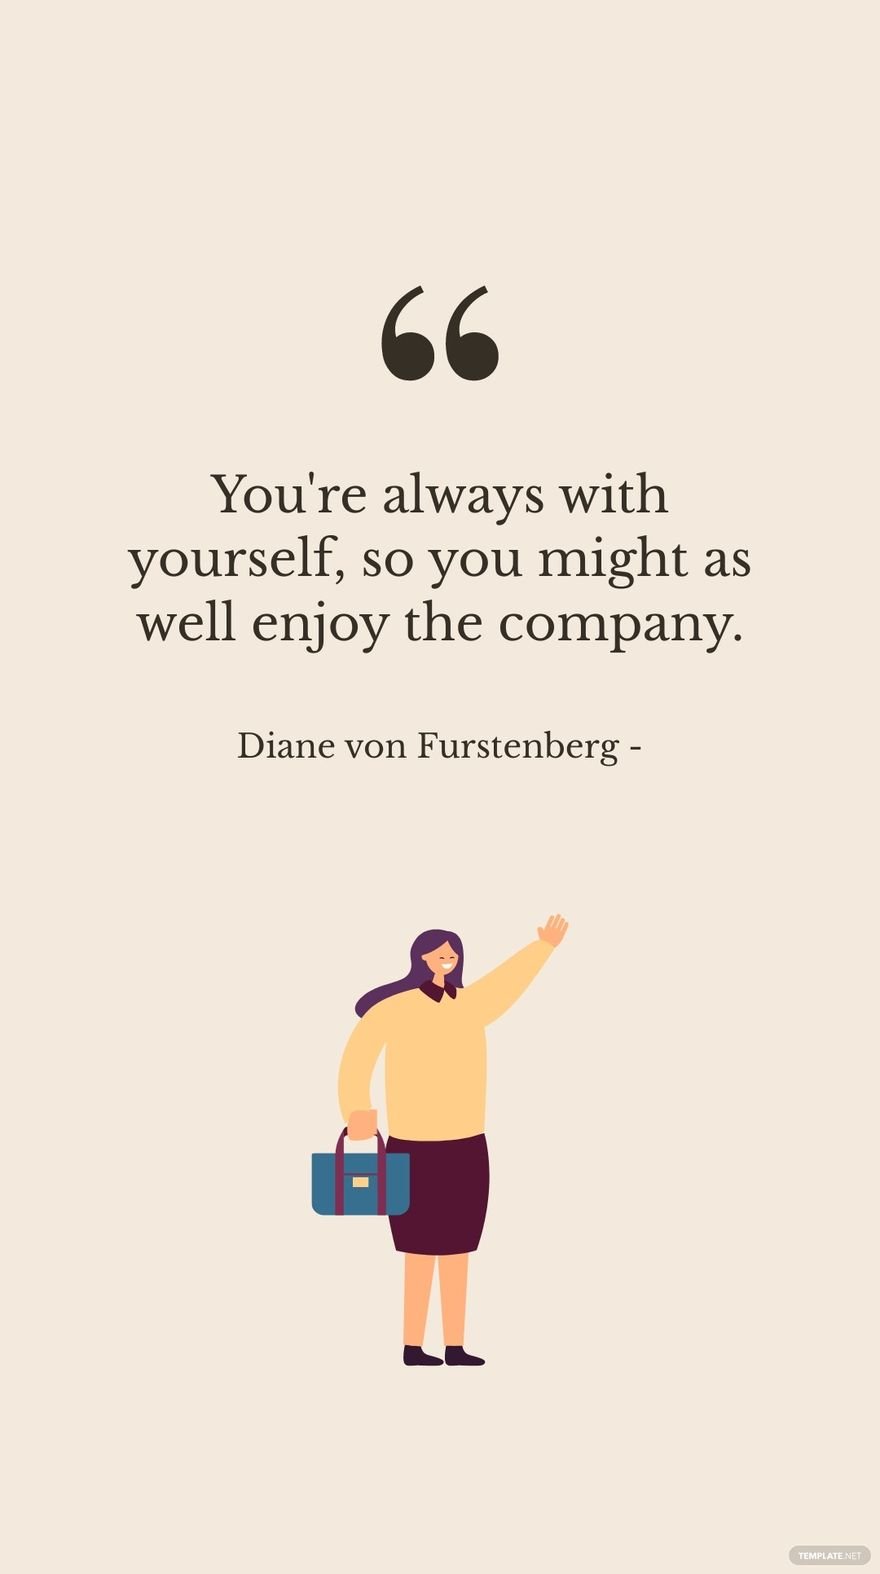 Free Diane von Furstenberg - You're always with yourself, so you might as well enjoy the company. in JPG